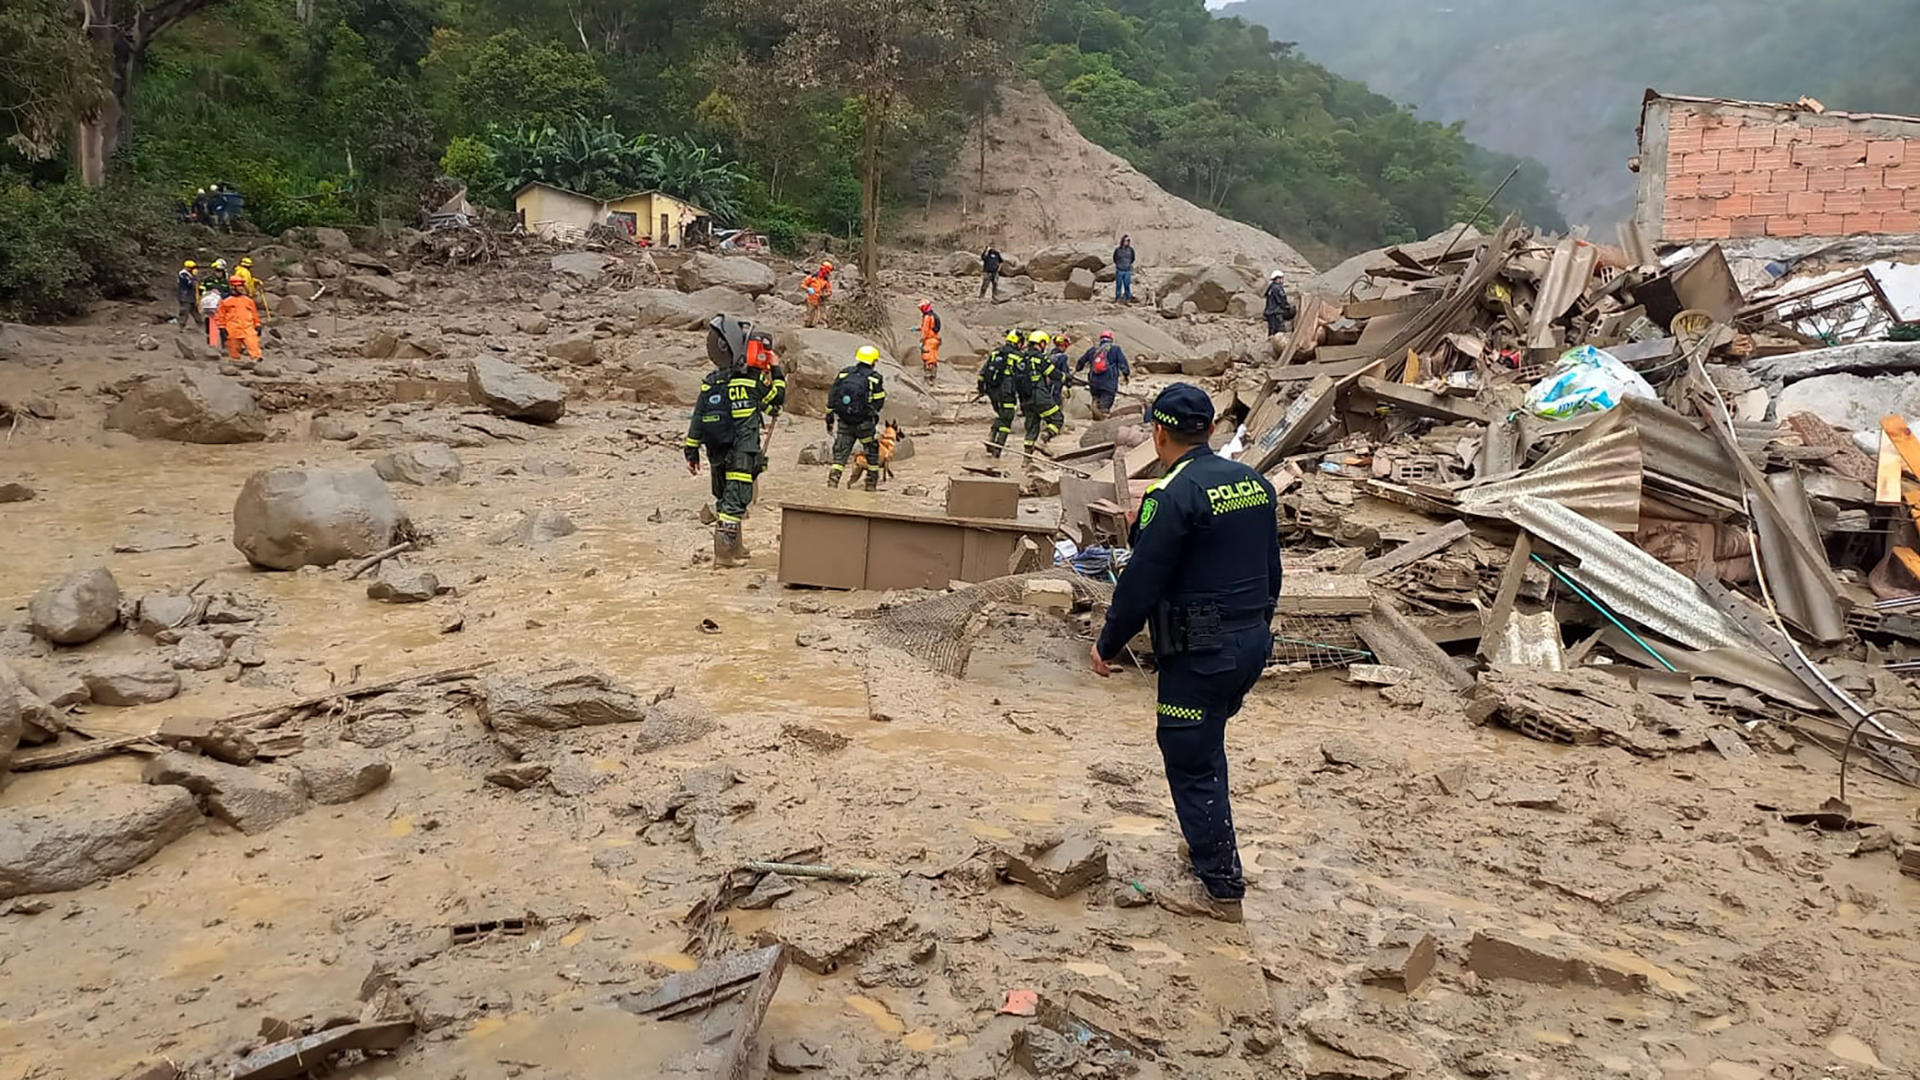 A photo provided by Colombia's National Police that shows rescue teams operating in an area of the central municipality of Quetame where a mudslide occurred on 18 July 2023. EFE/COLOMBIA'S NATIONAL POLICE
